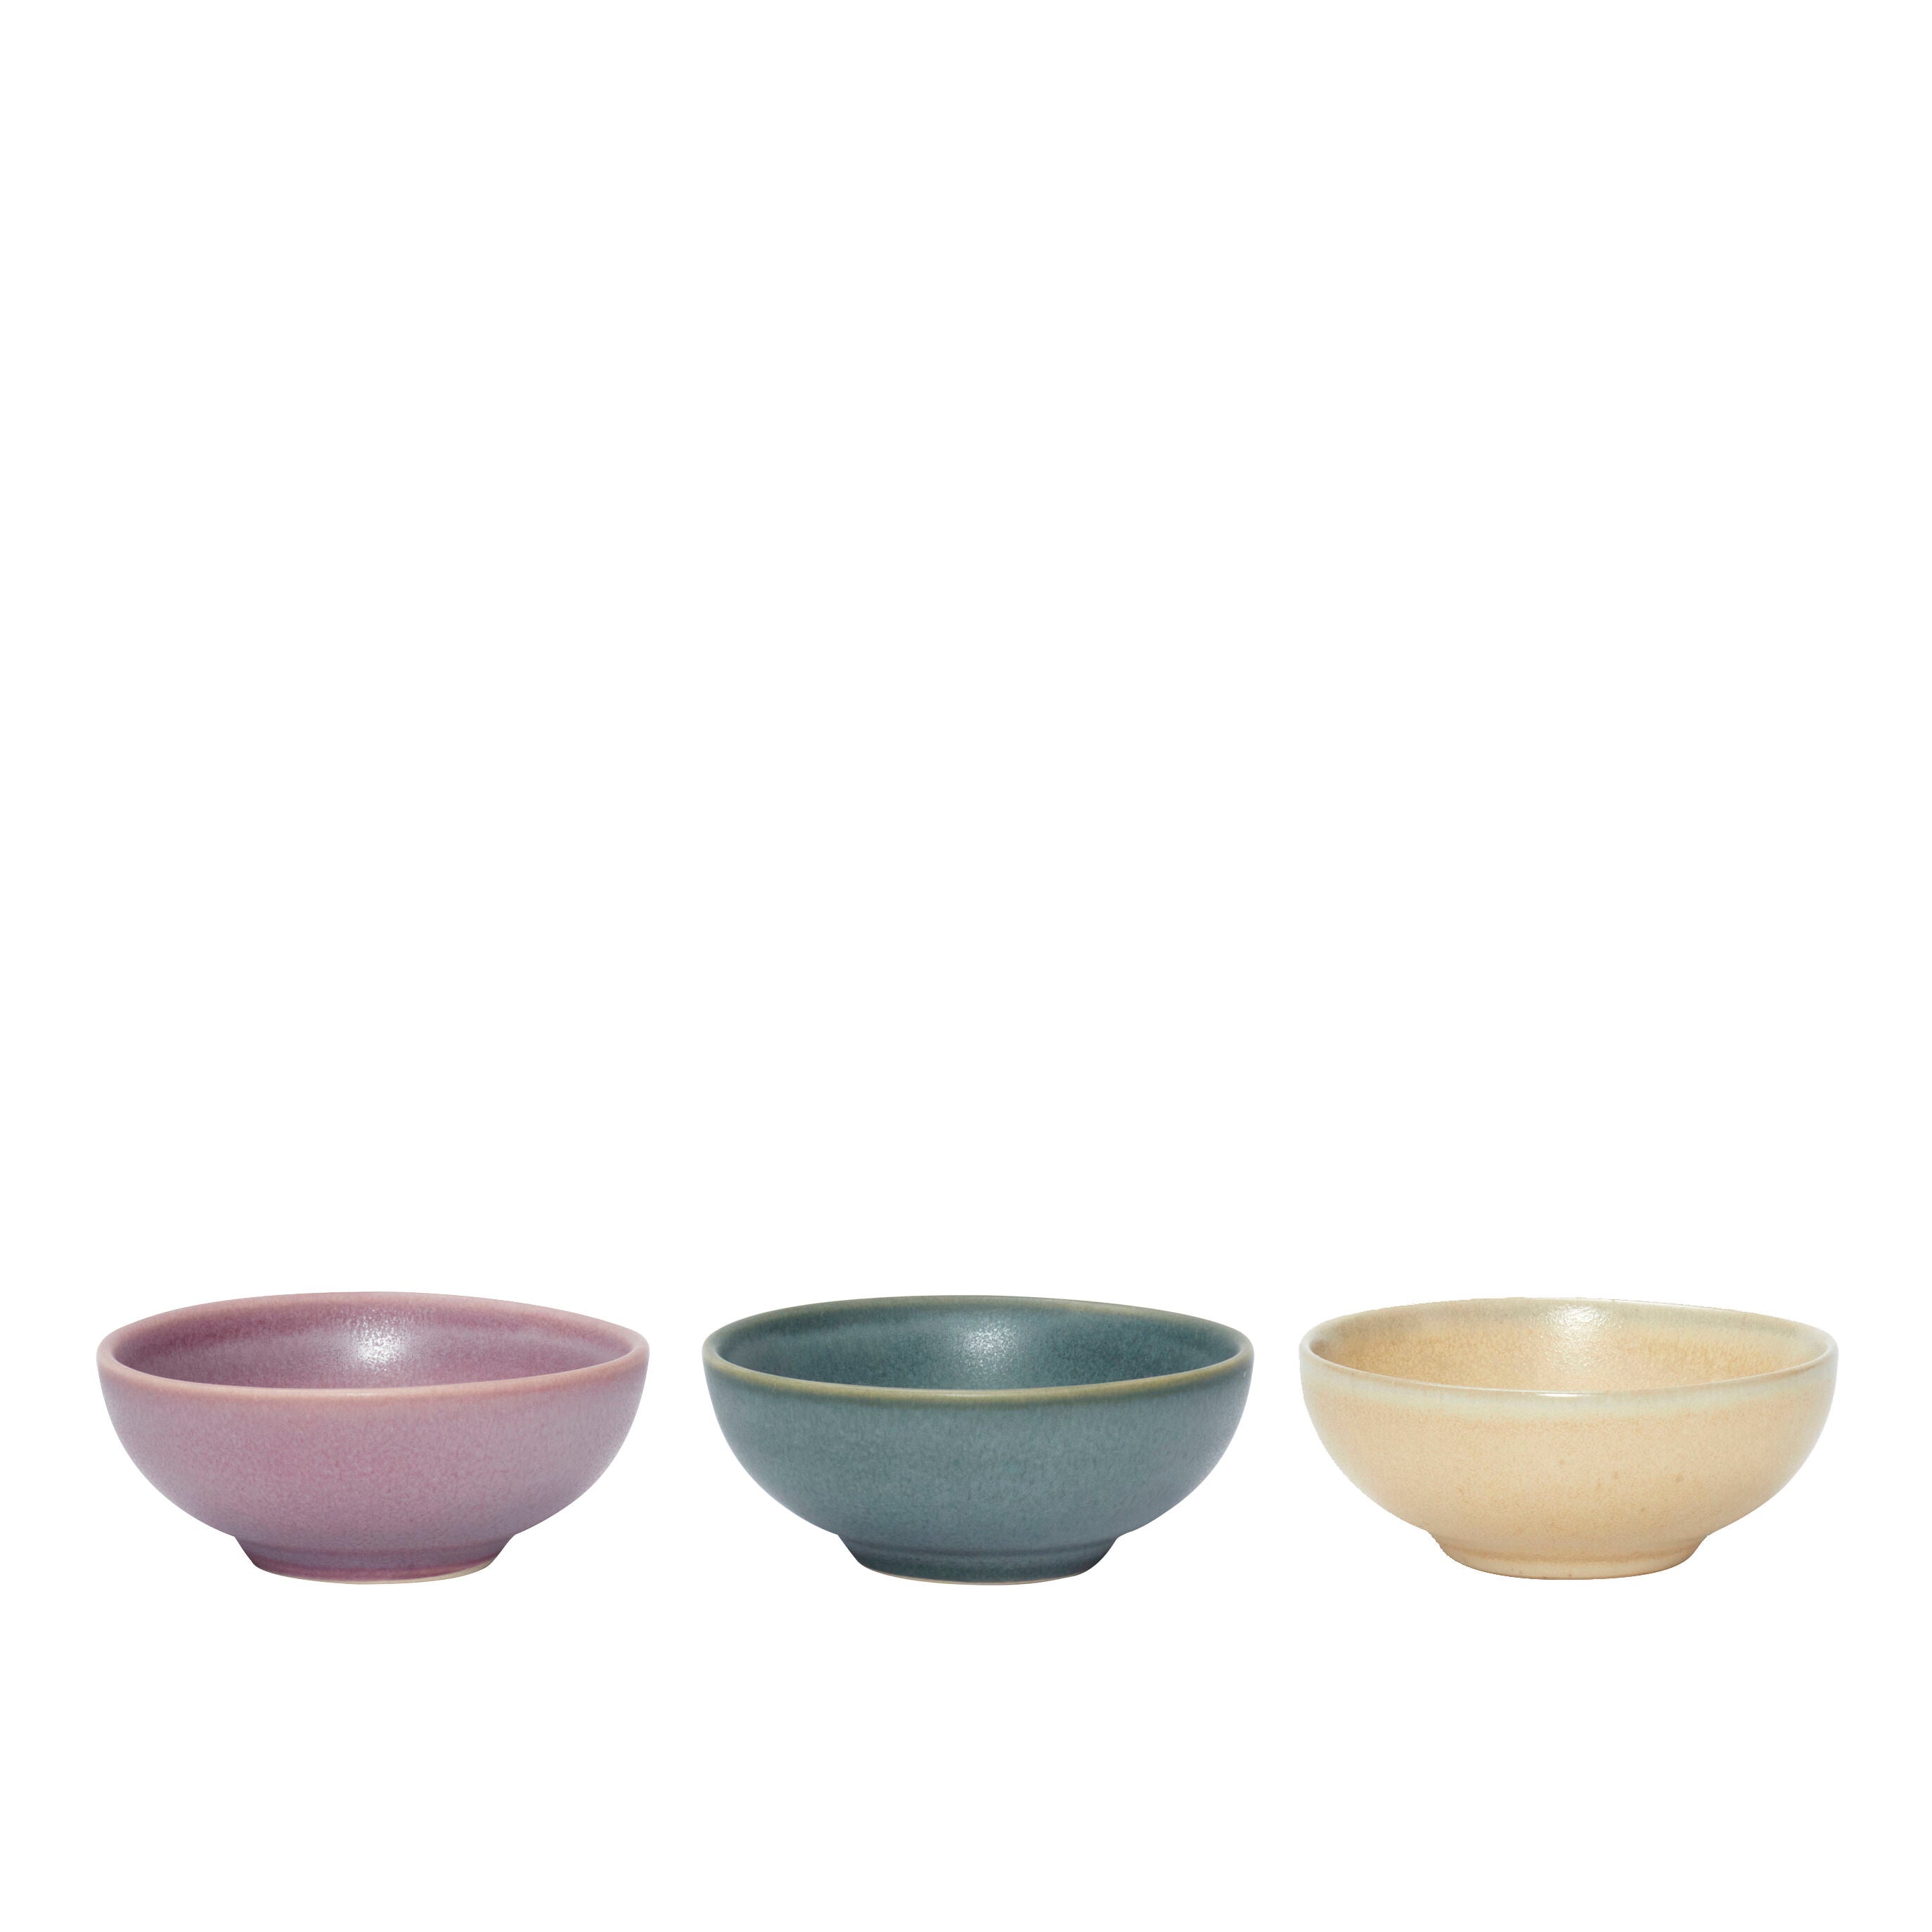 Trio Bowls Small Rose/Green/Beige - set of 3